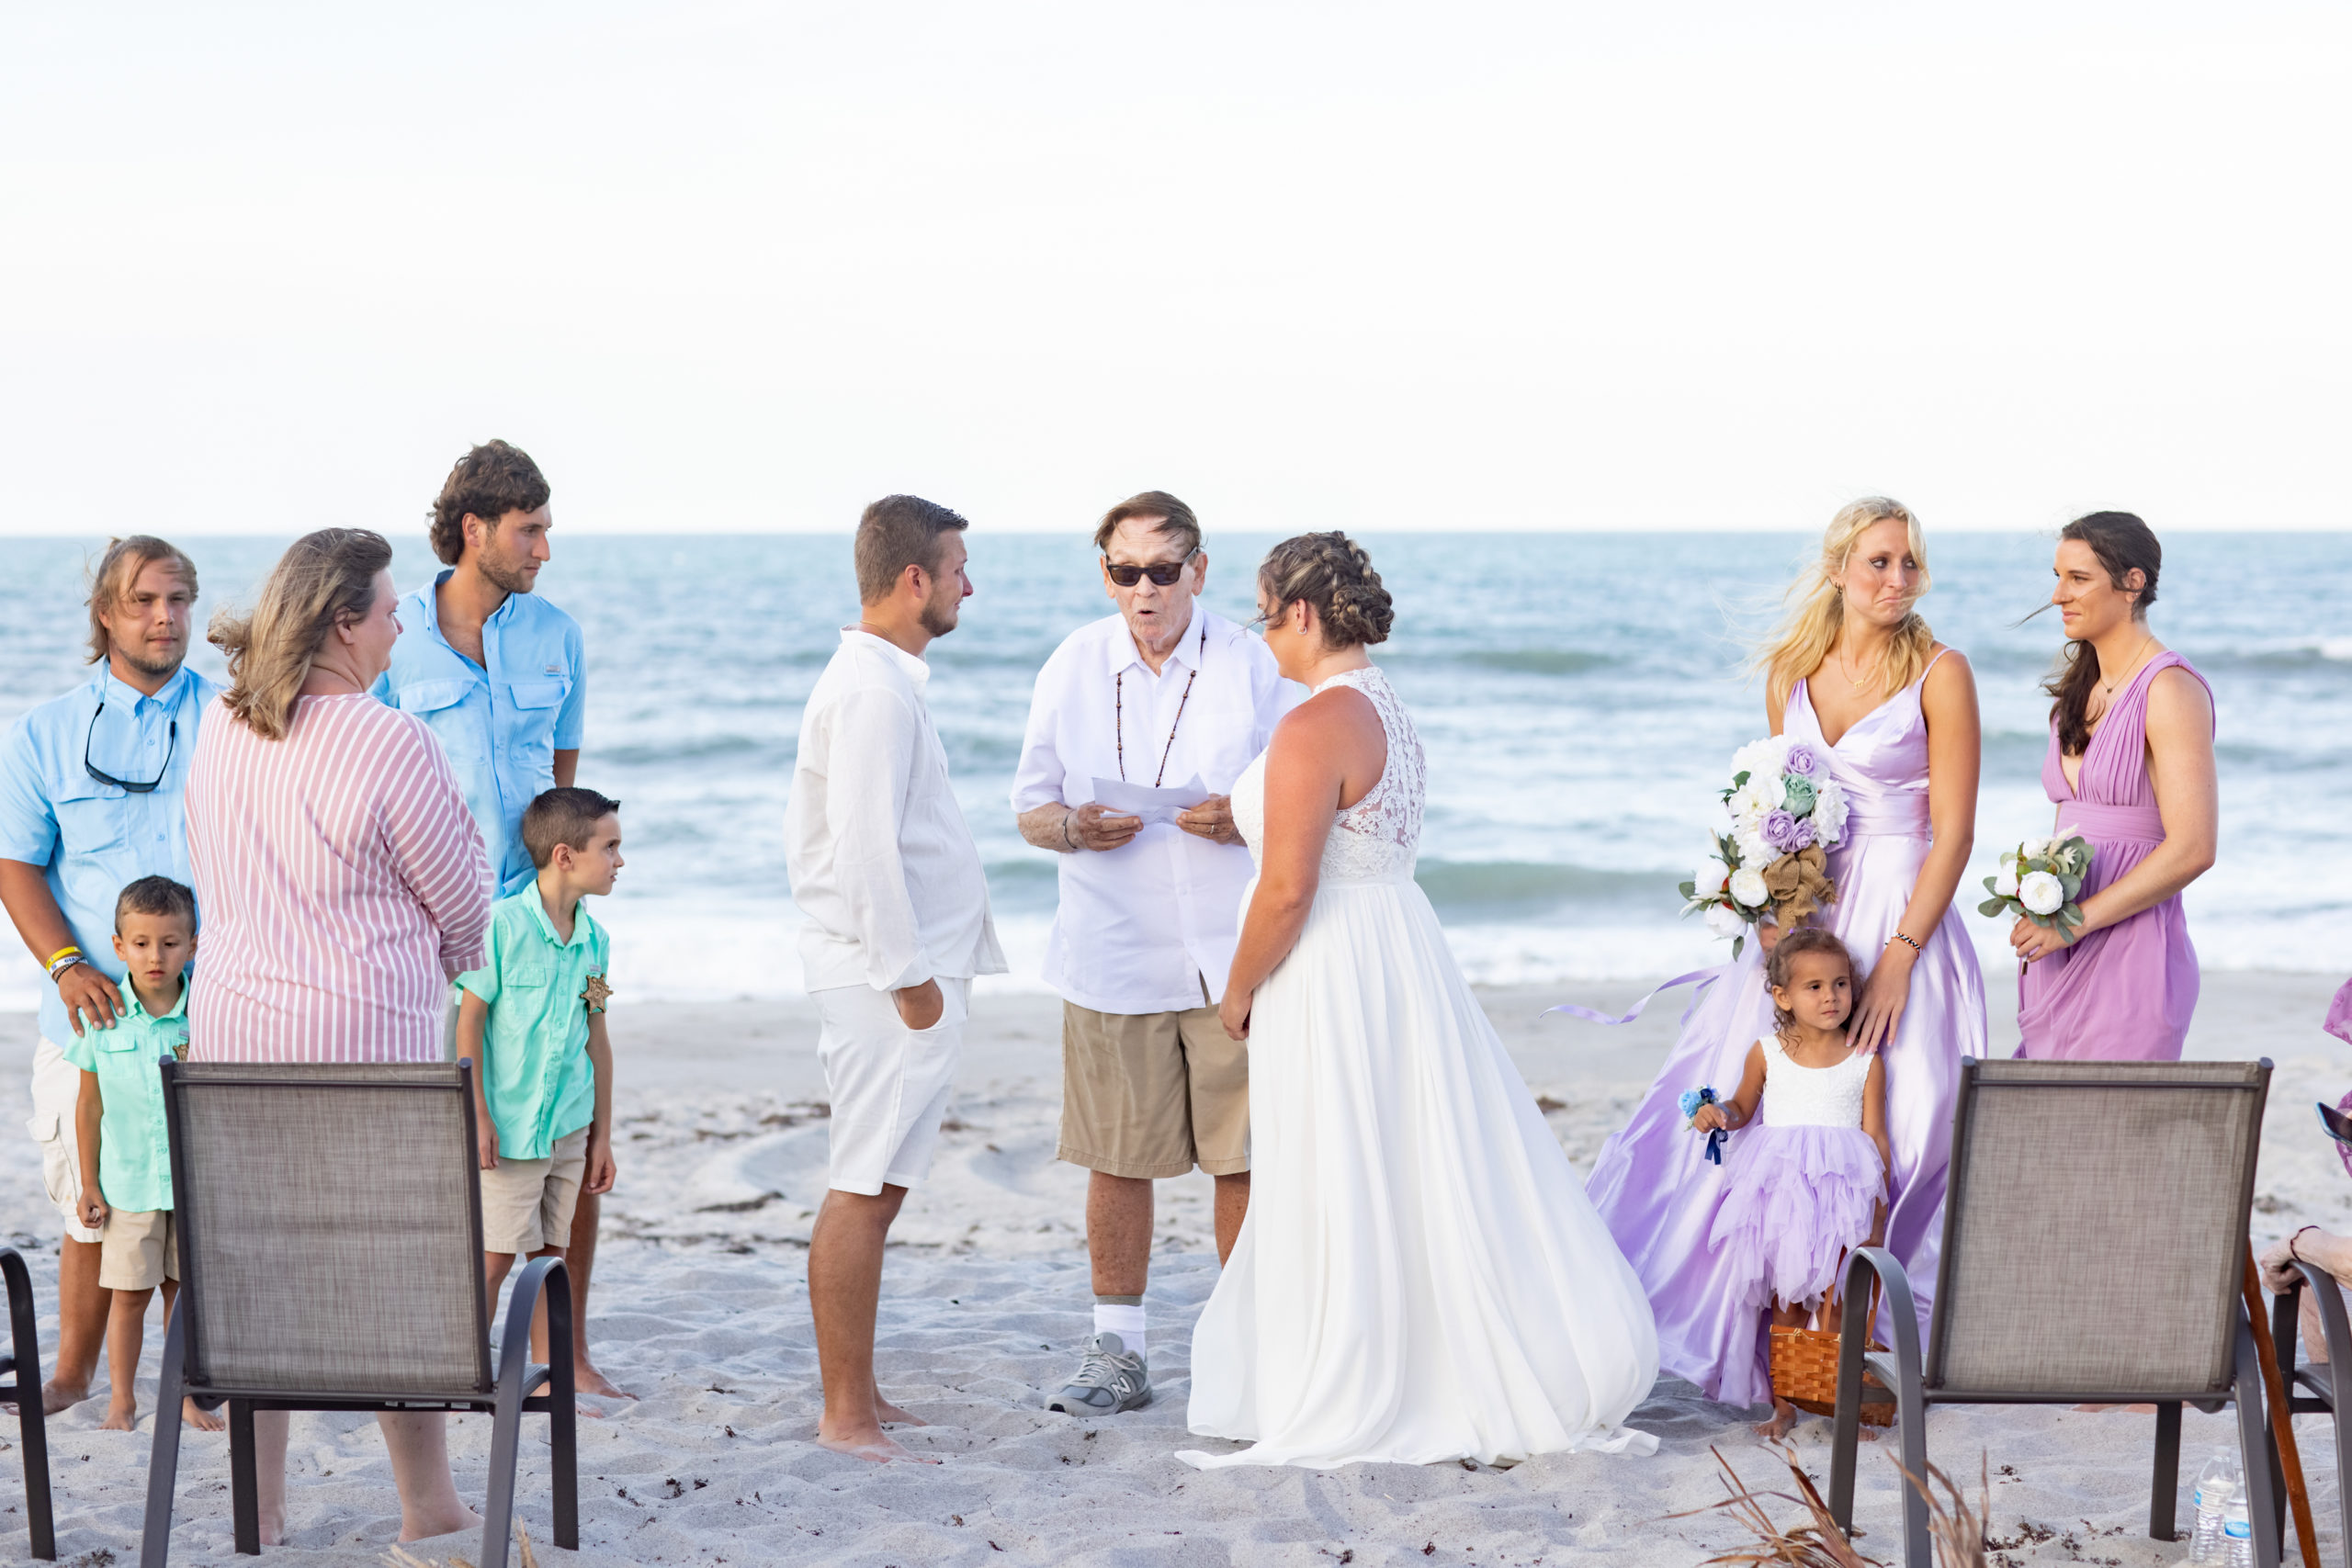 wedding ceremony on the beach with bridesmaids in purple and boys in blue